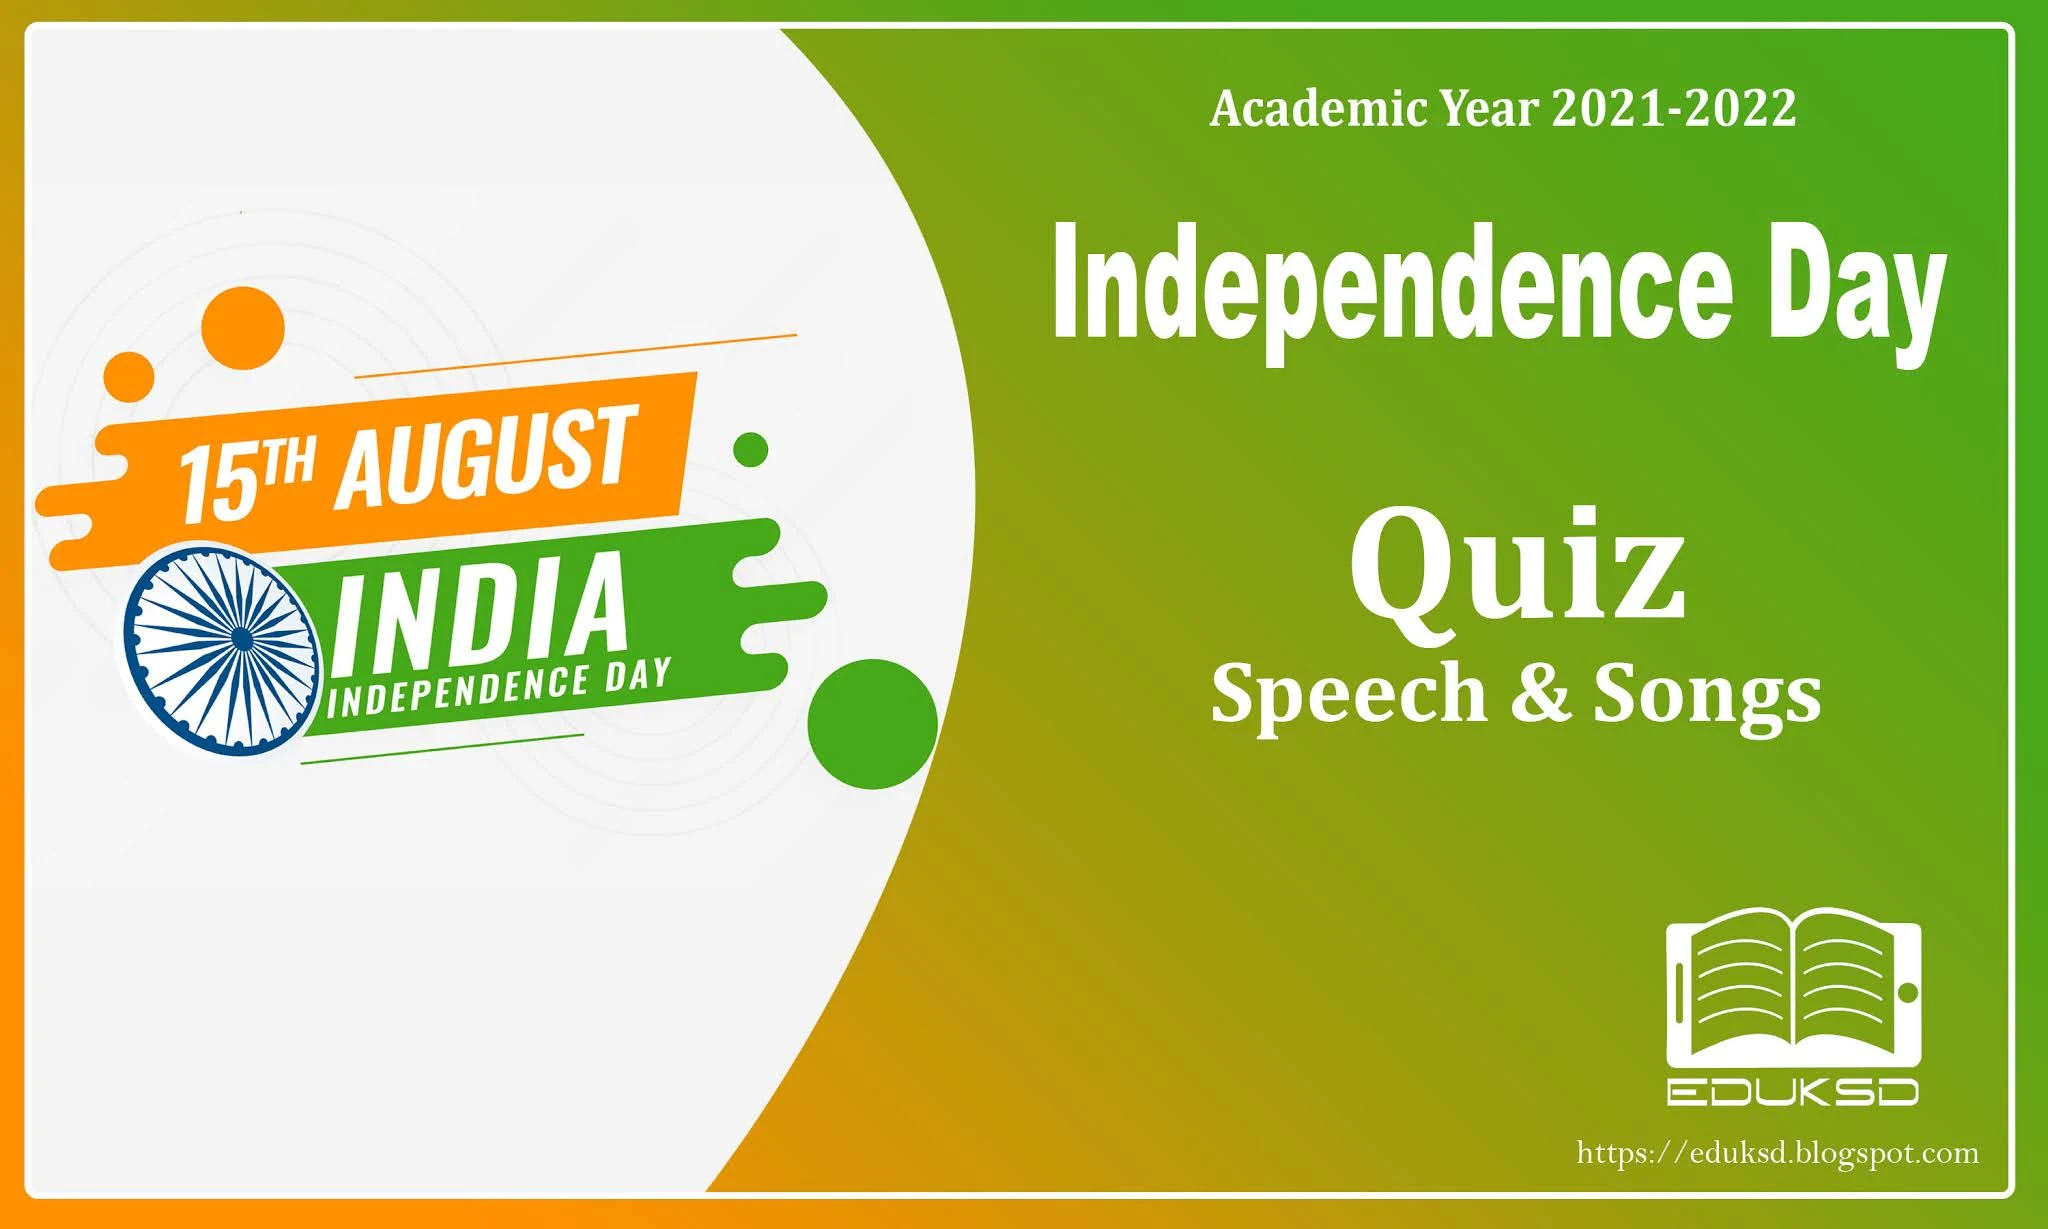 INDEPENDENCE DAY QUIZ , SPEECH & SONGS